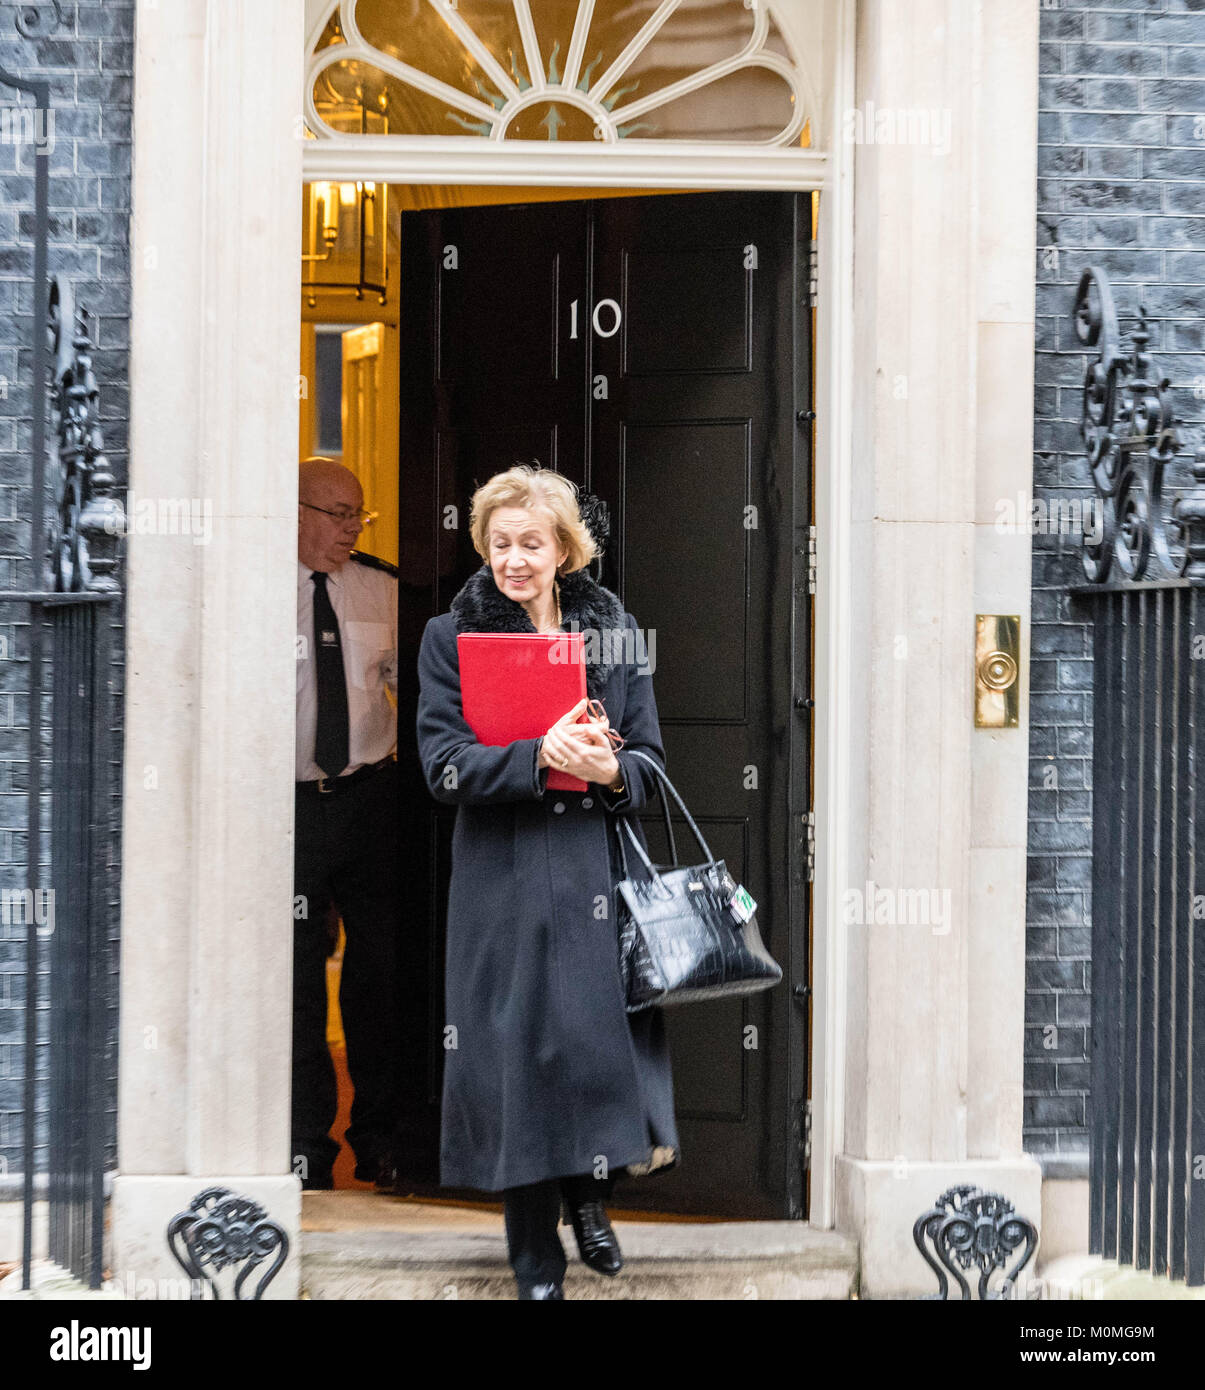 London, UK. 23rd January, 2018. Andrea Leadsom, Leader of the House of Commons, leave 10 Downing Street following a cabinet meeting Credit: Ian Davidson/Alamy Live News Stock Photo